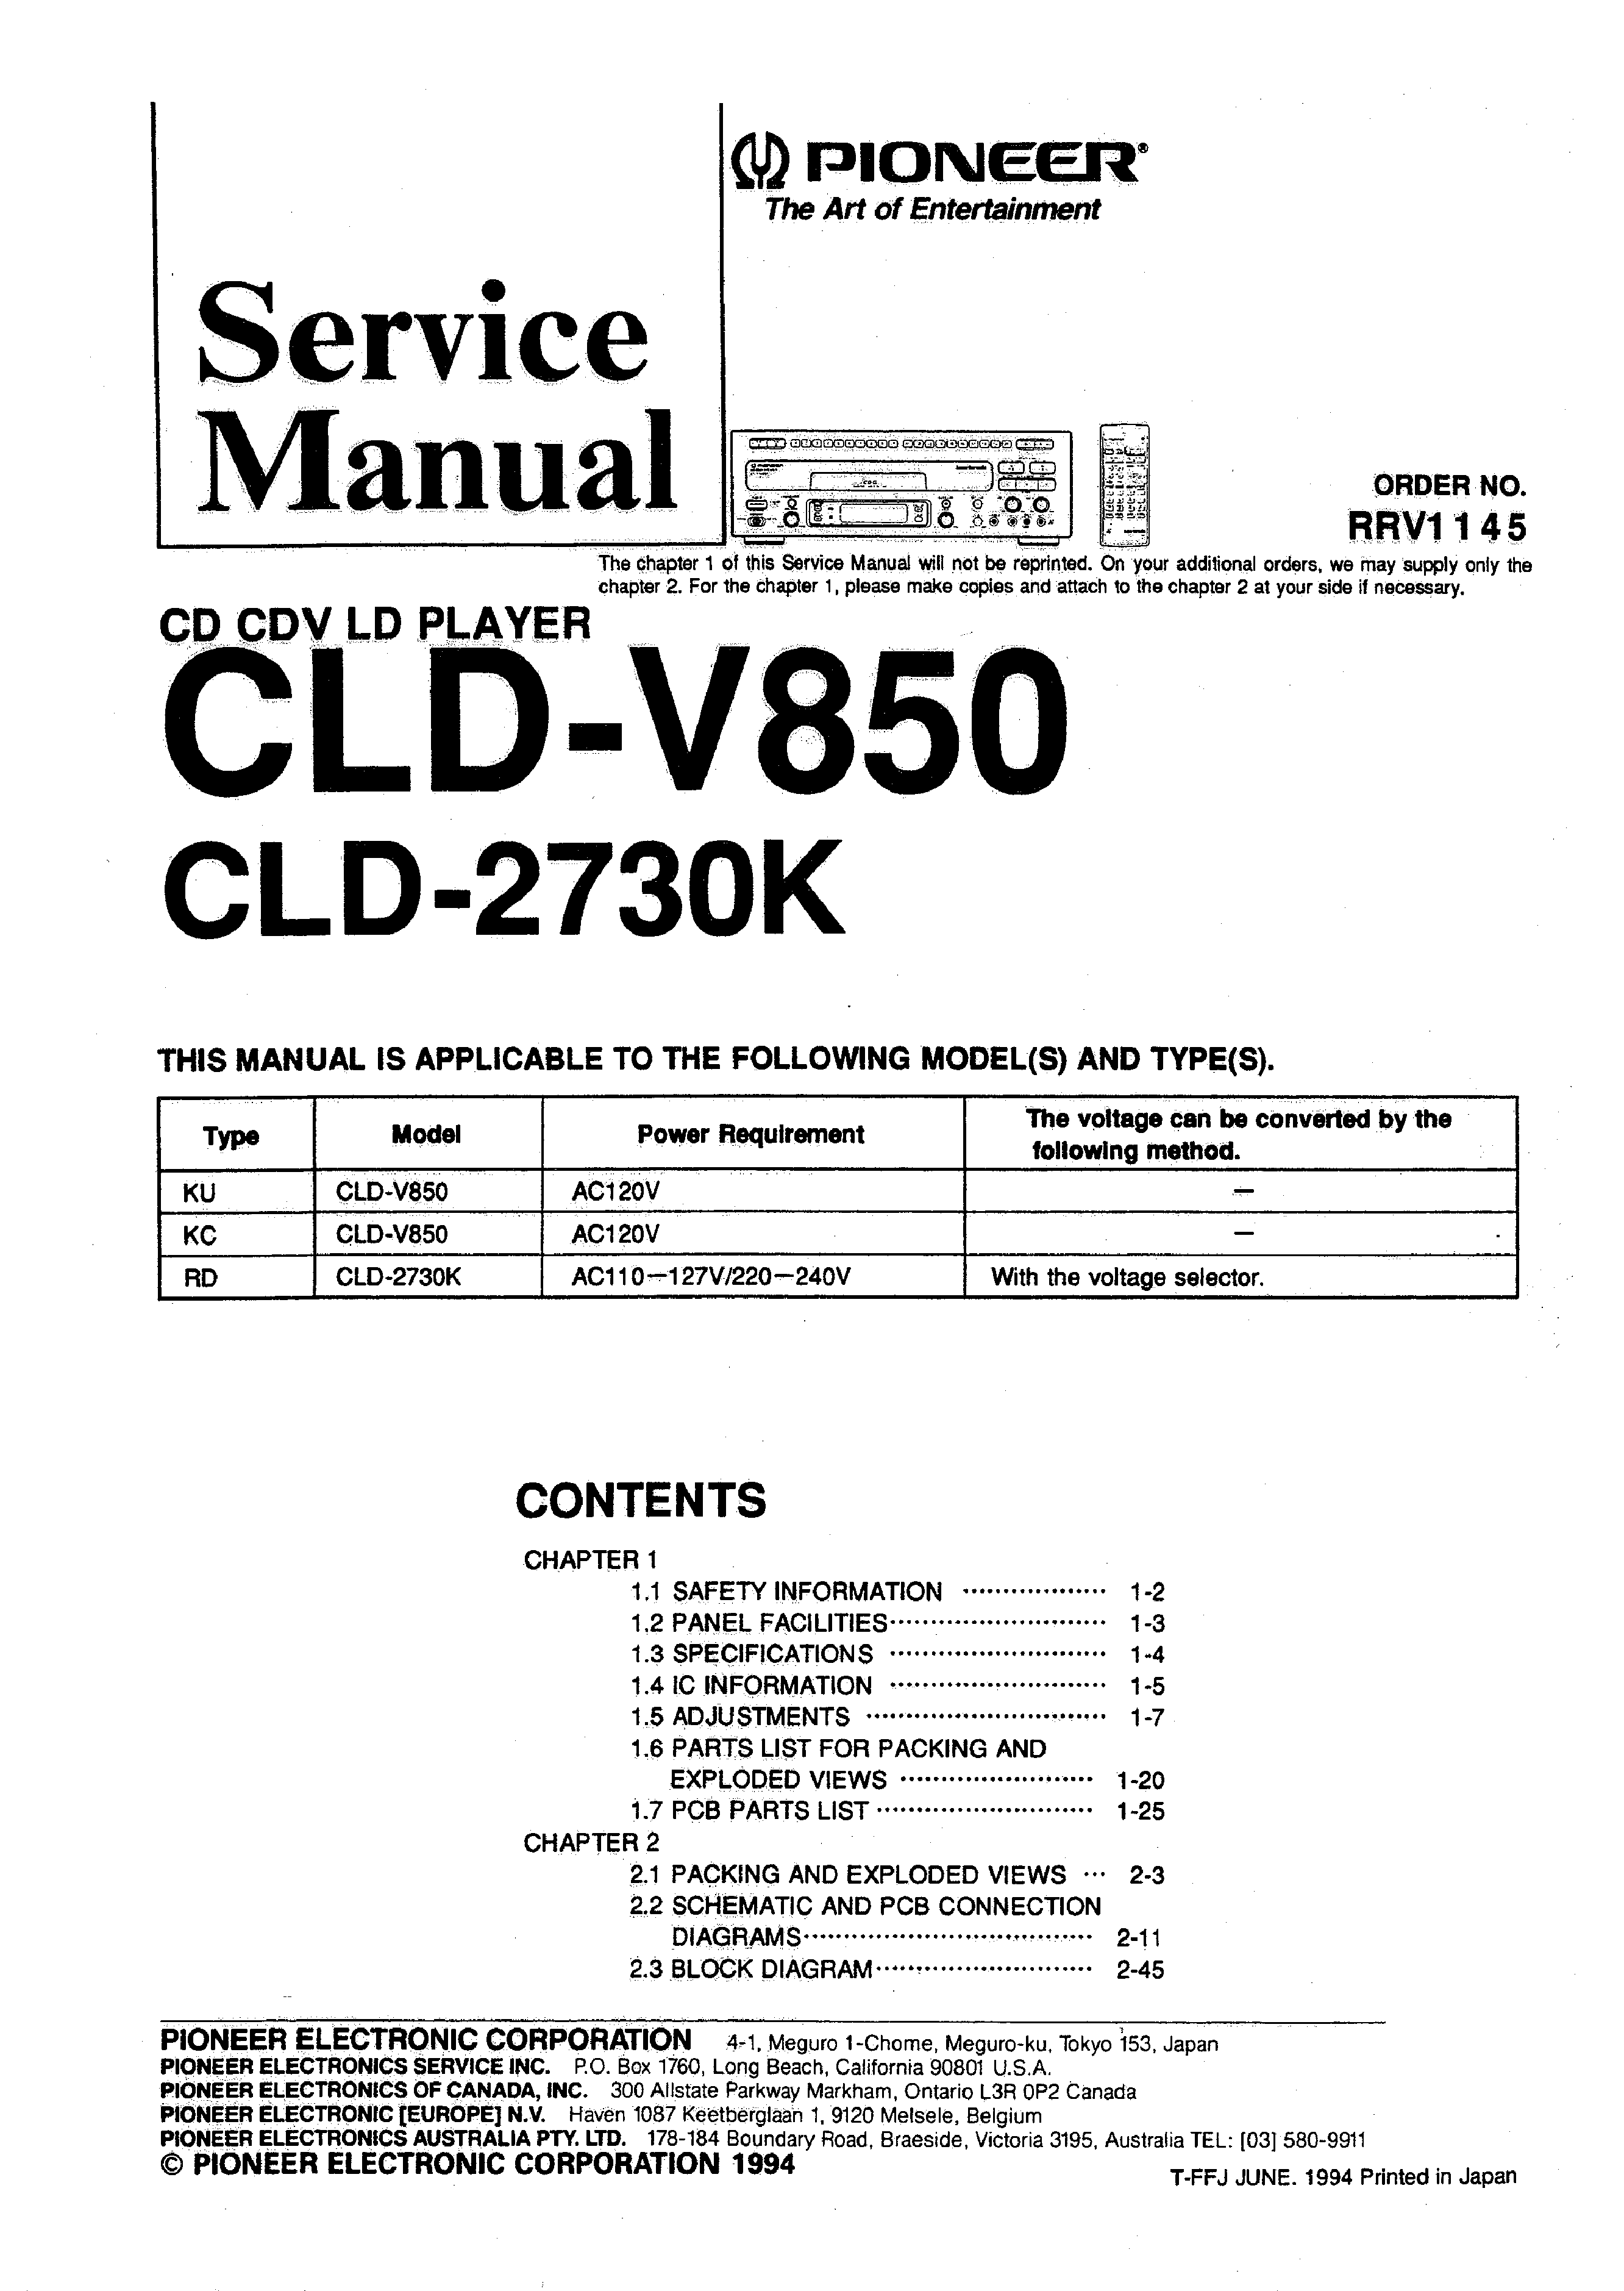 Service Manual for PIONEER CLD-2730K - Download